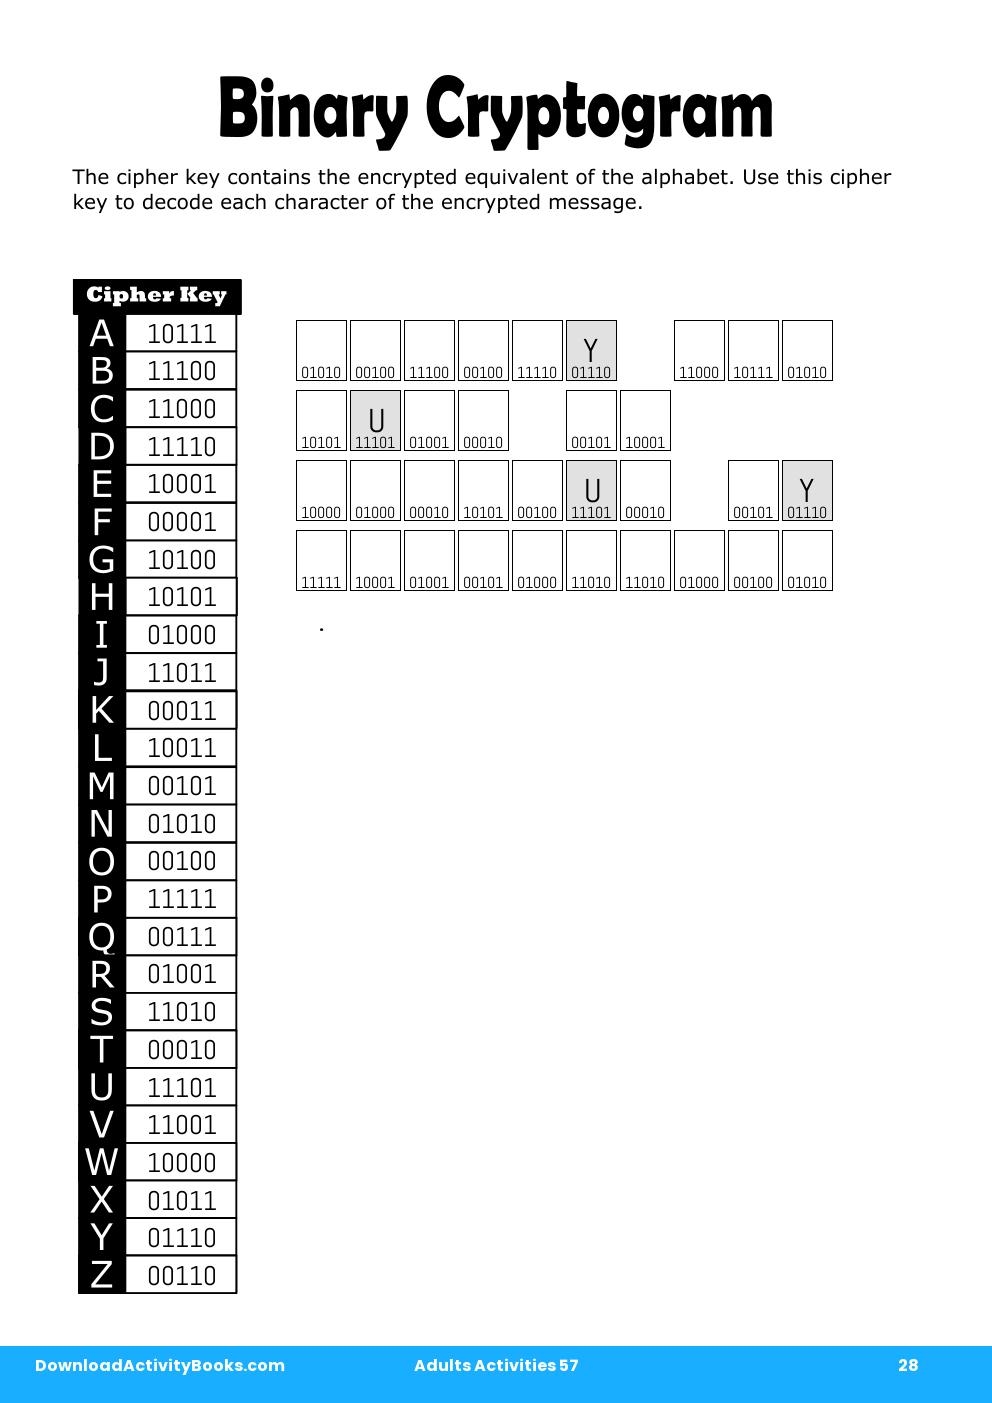 Binary Cryptogram in Adults Activities 57